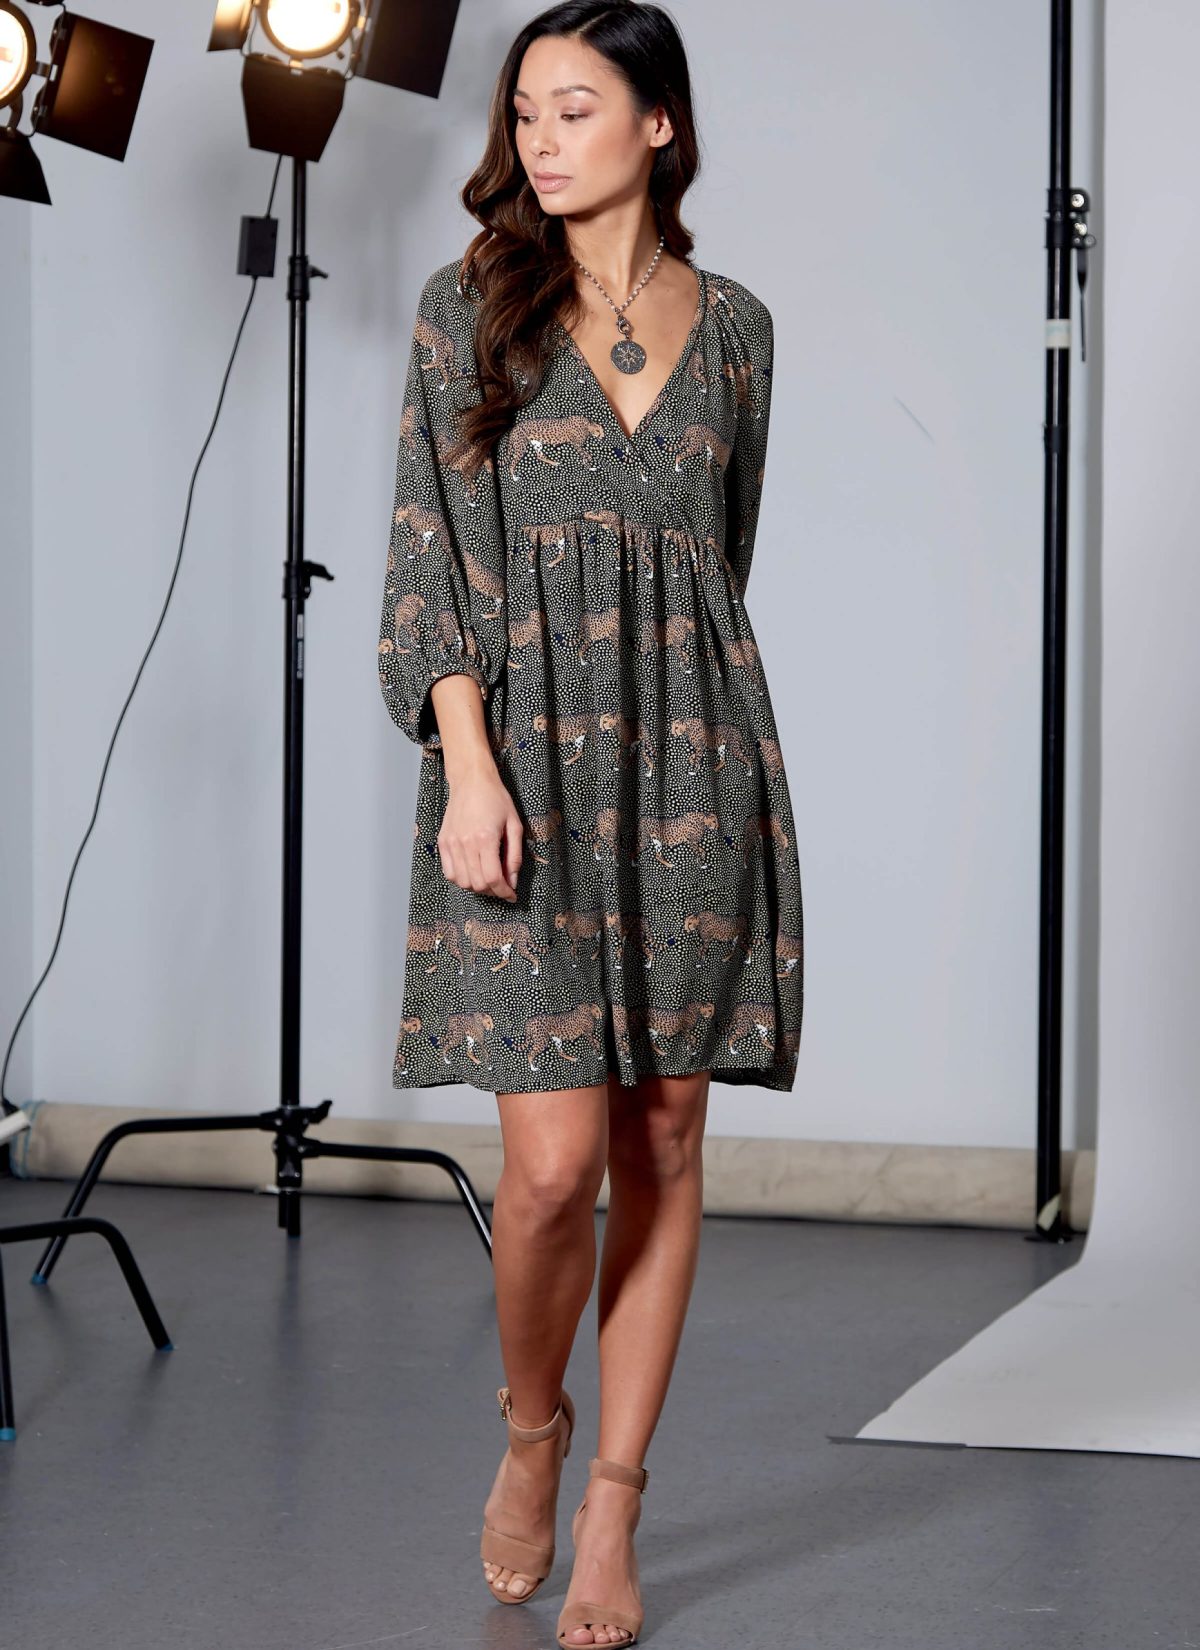 McCall's Sewing Pattern M7969 Misses' Dresses